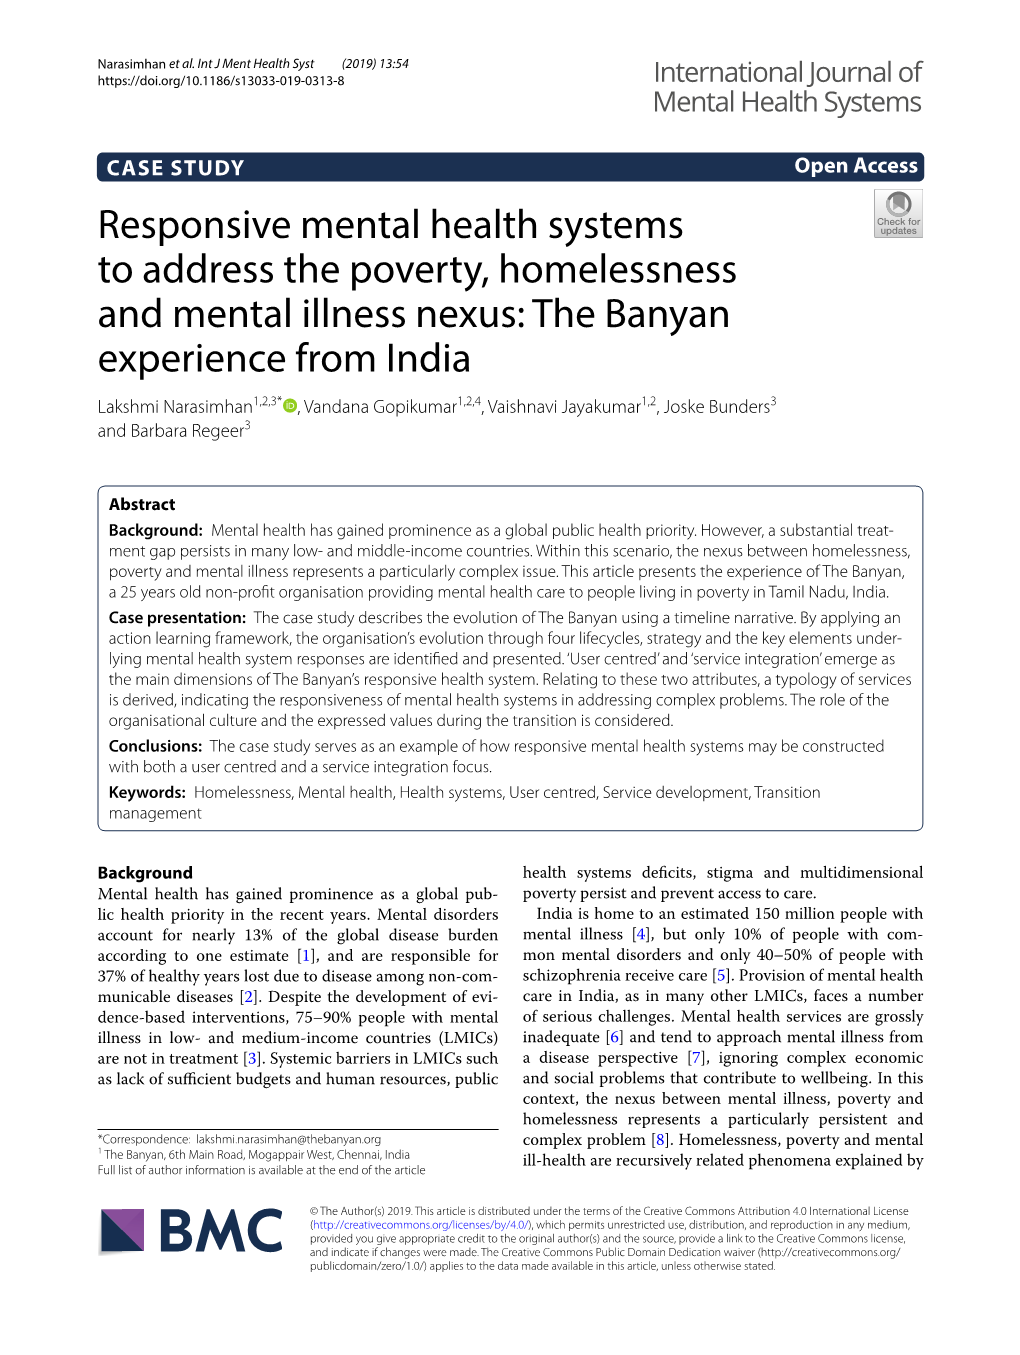 Responsive Mental Health Systems to Address the Poverty, Homelessness